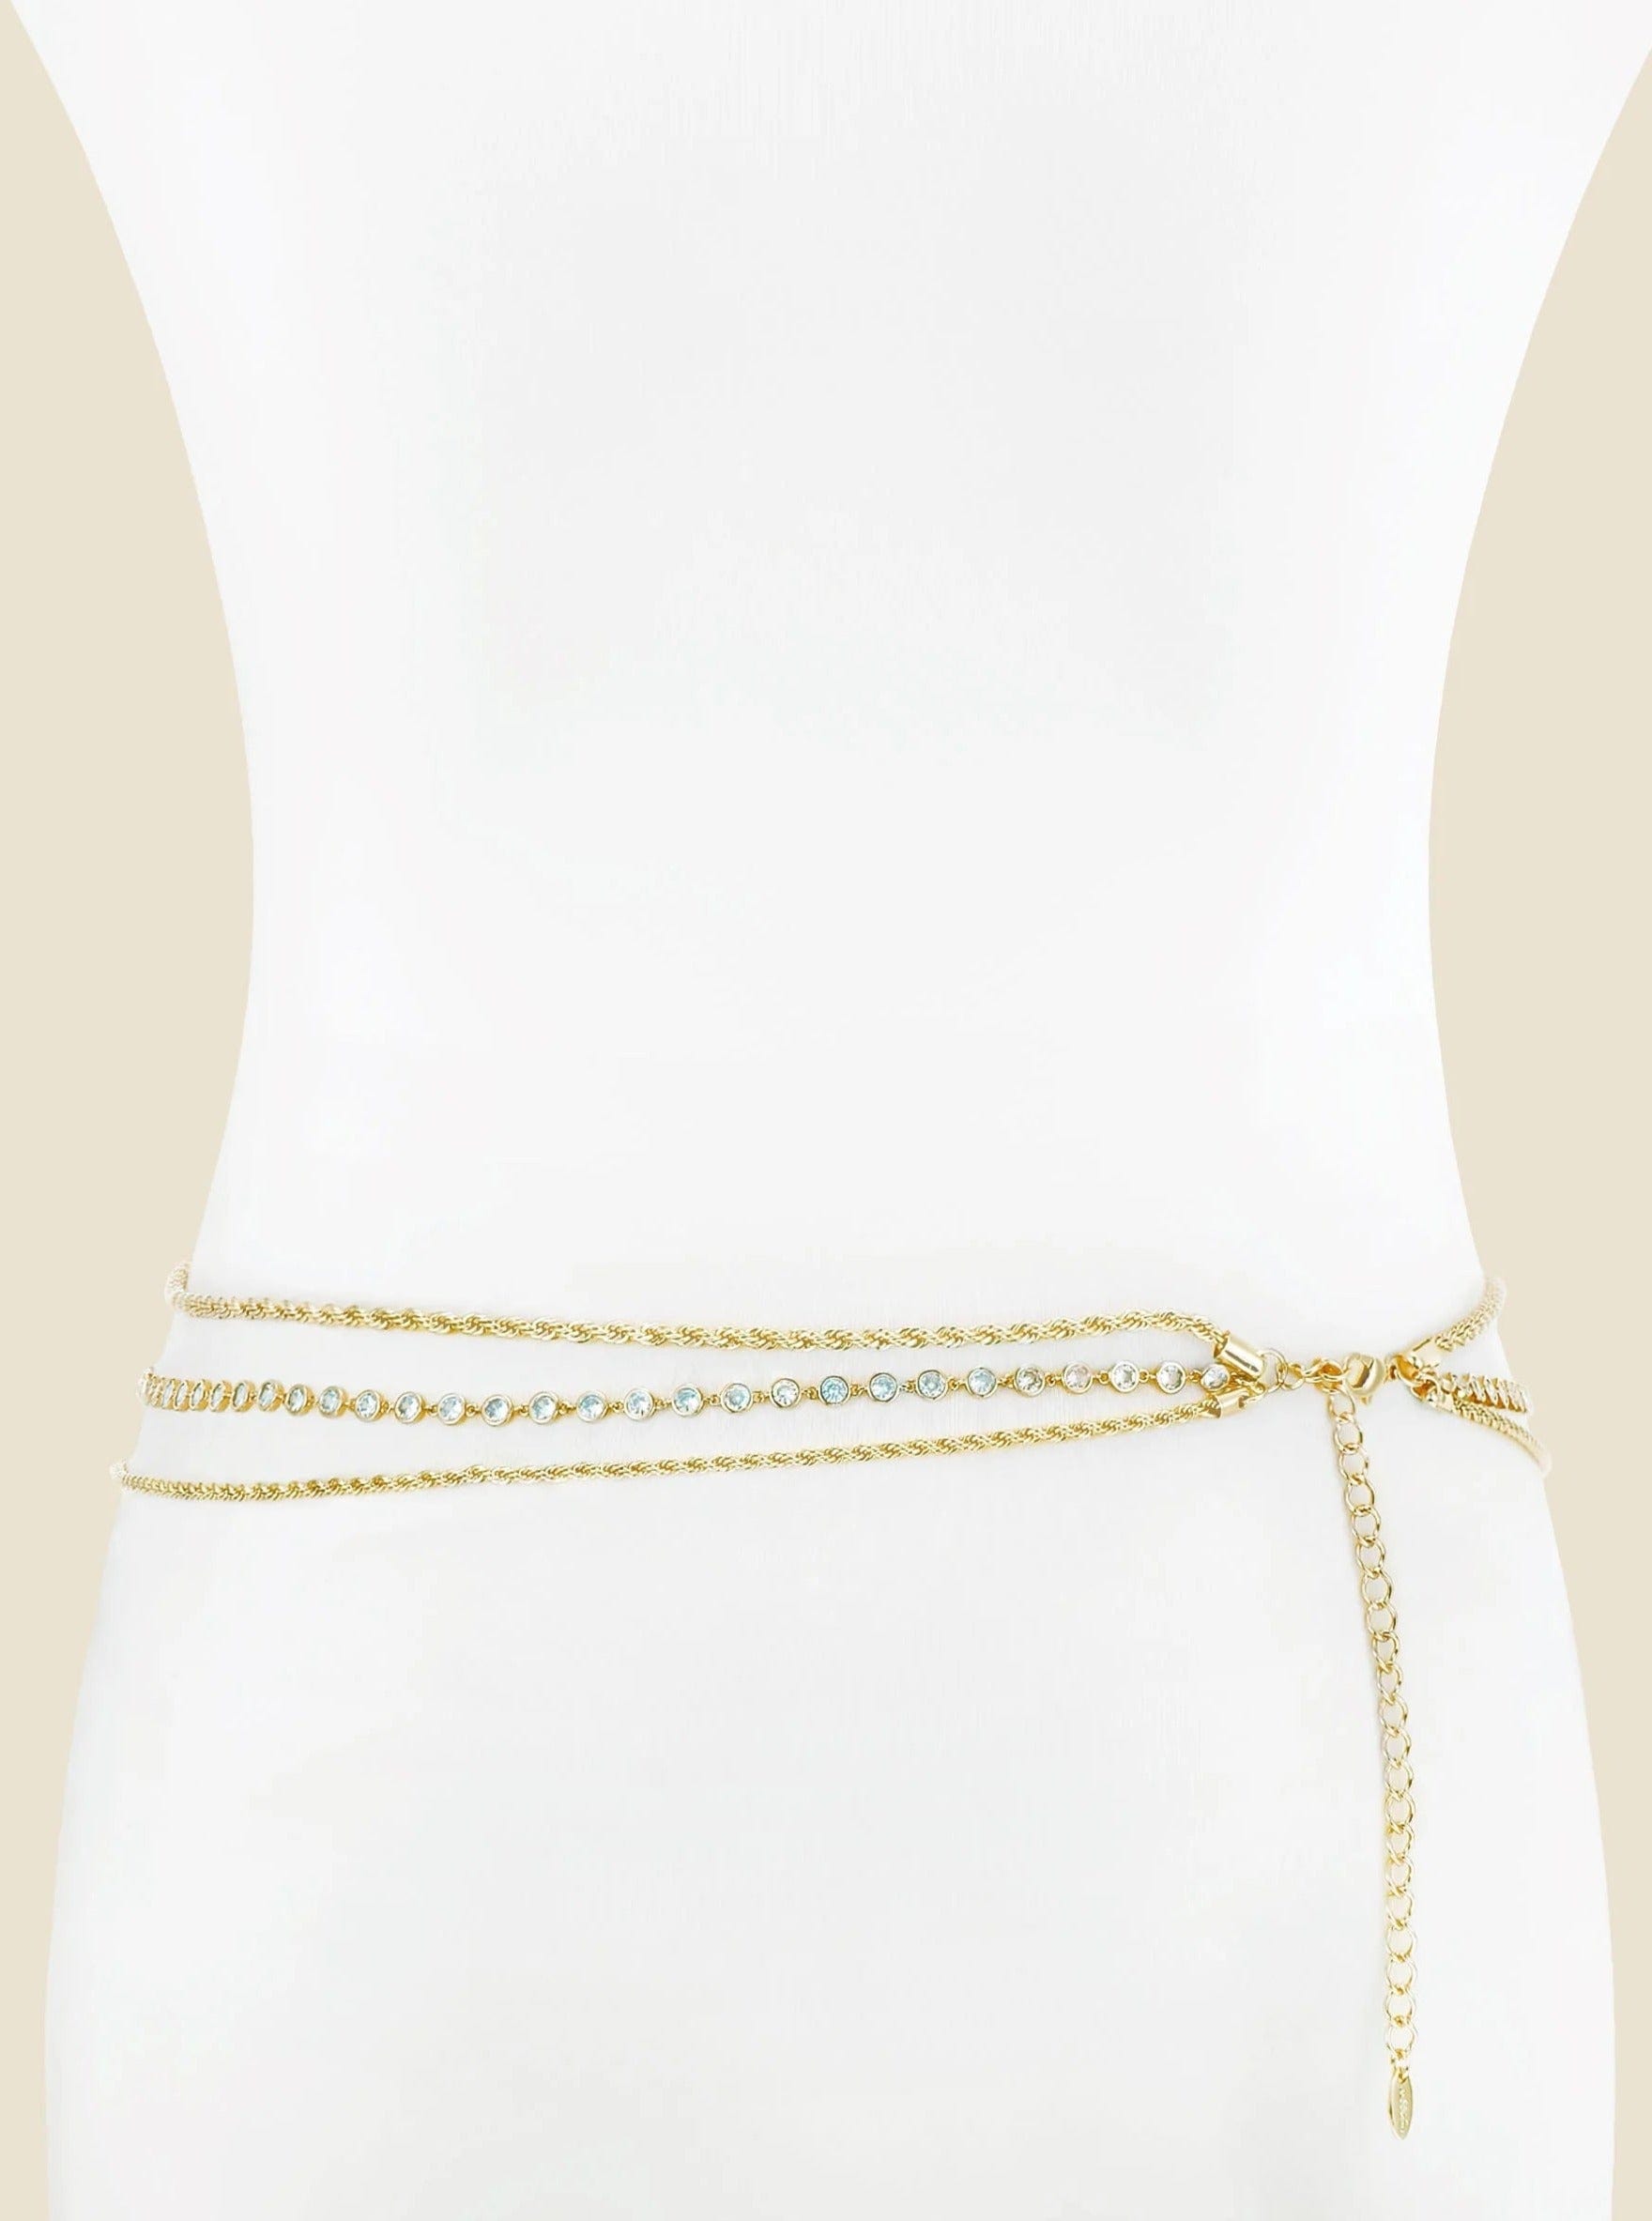 ettika body chain Gold Metal Chain Clear Crystals / One Size Adjustable SIMPLE SUMMER STAPLE // BODY CHAIN